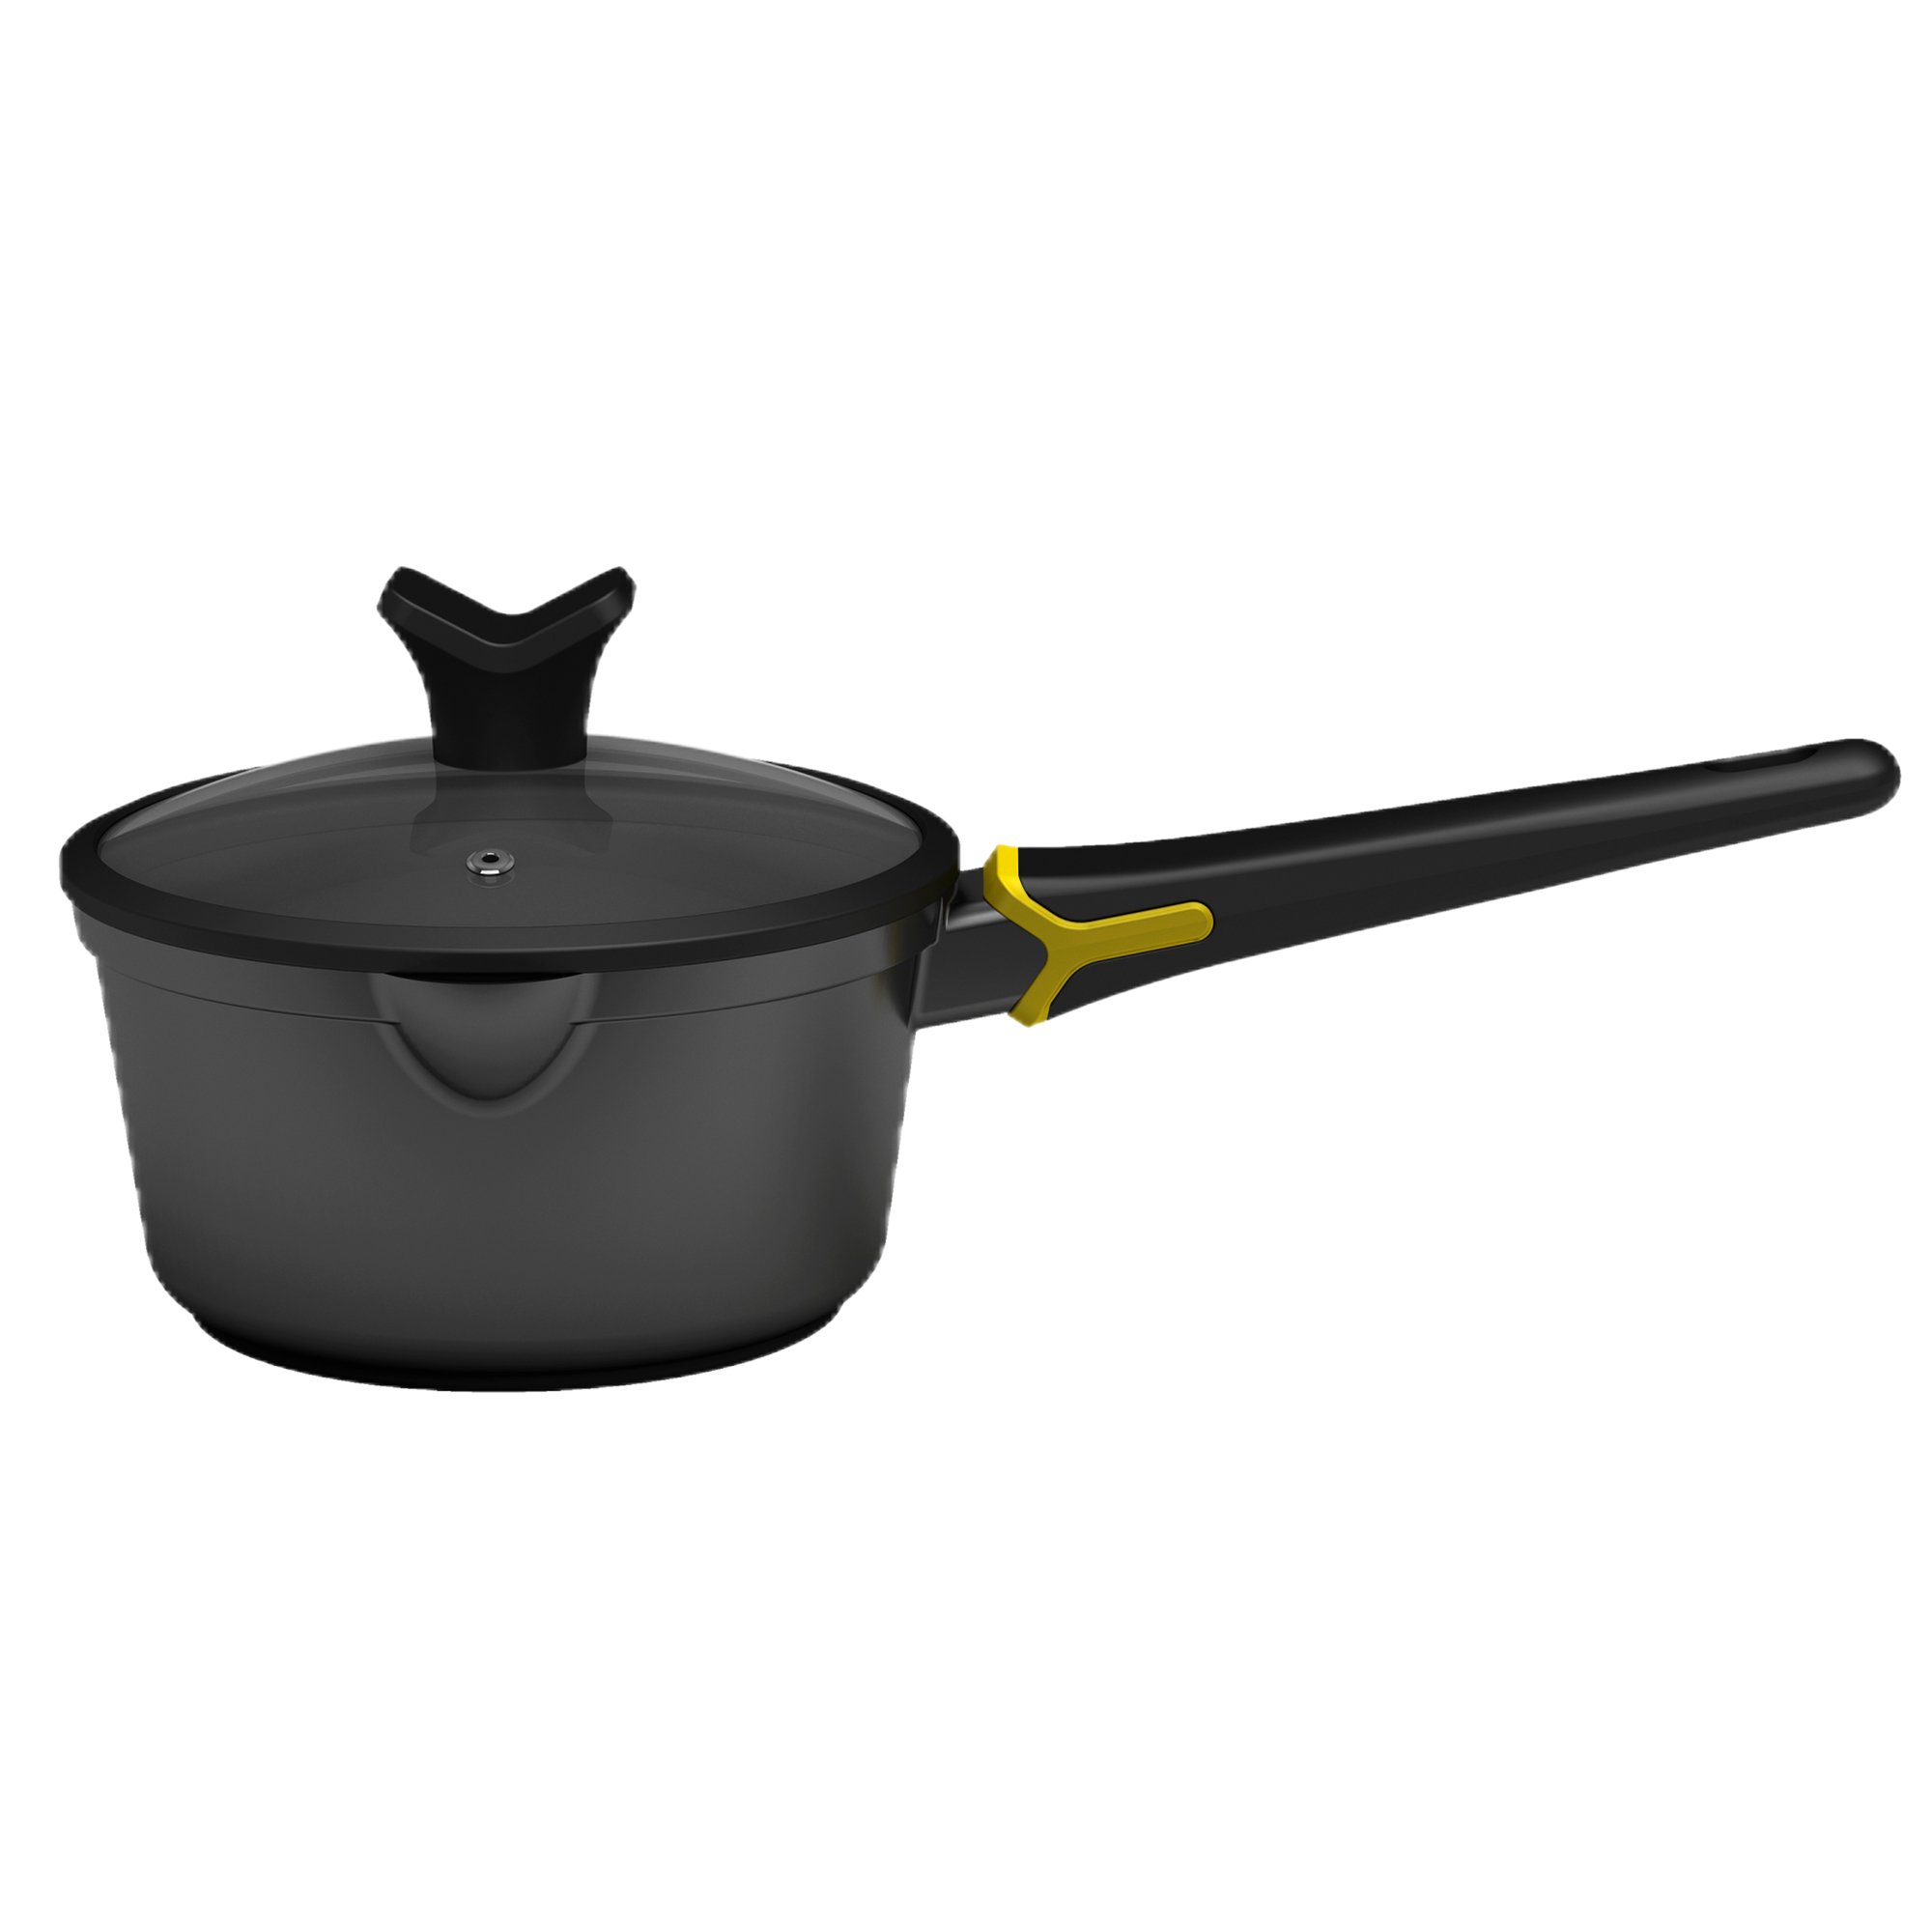 YOUNG Range Thermo Silicone Heat Indicator Non-stick Cookware Die Cast Aluminum Saucepan With Lid